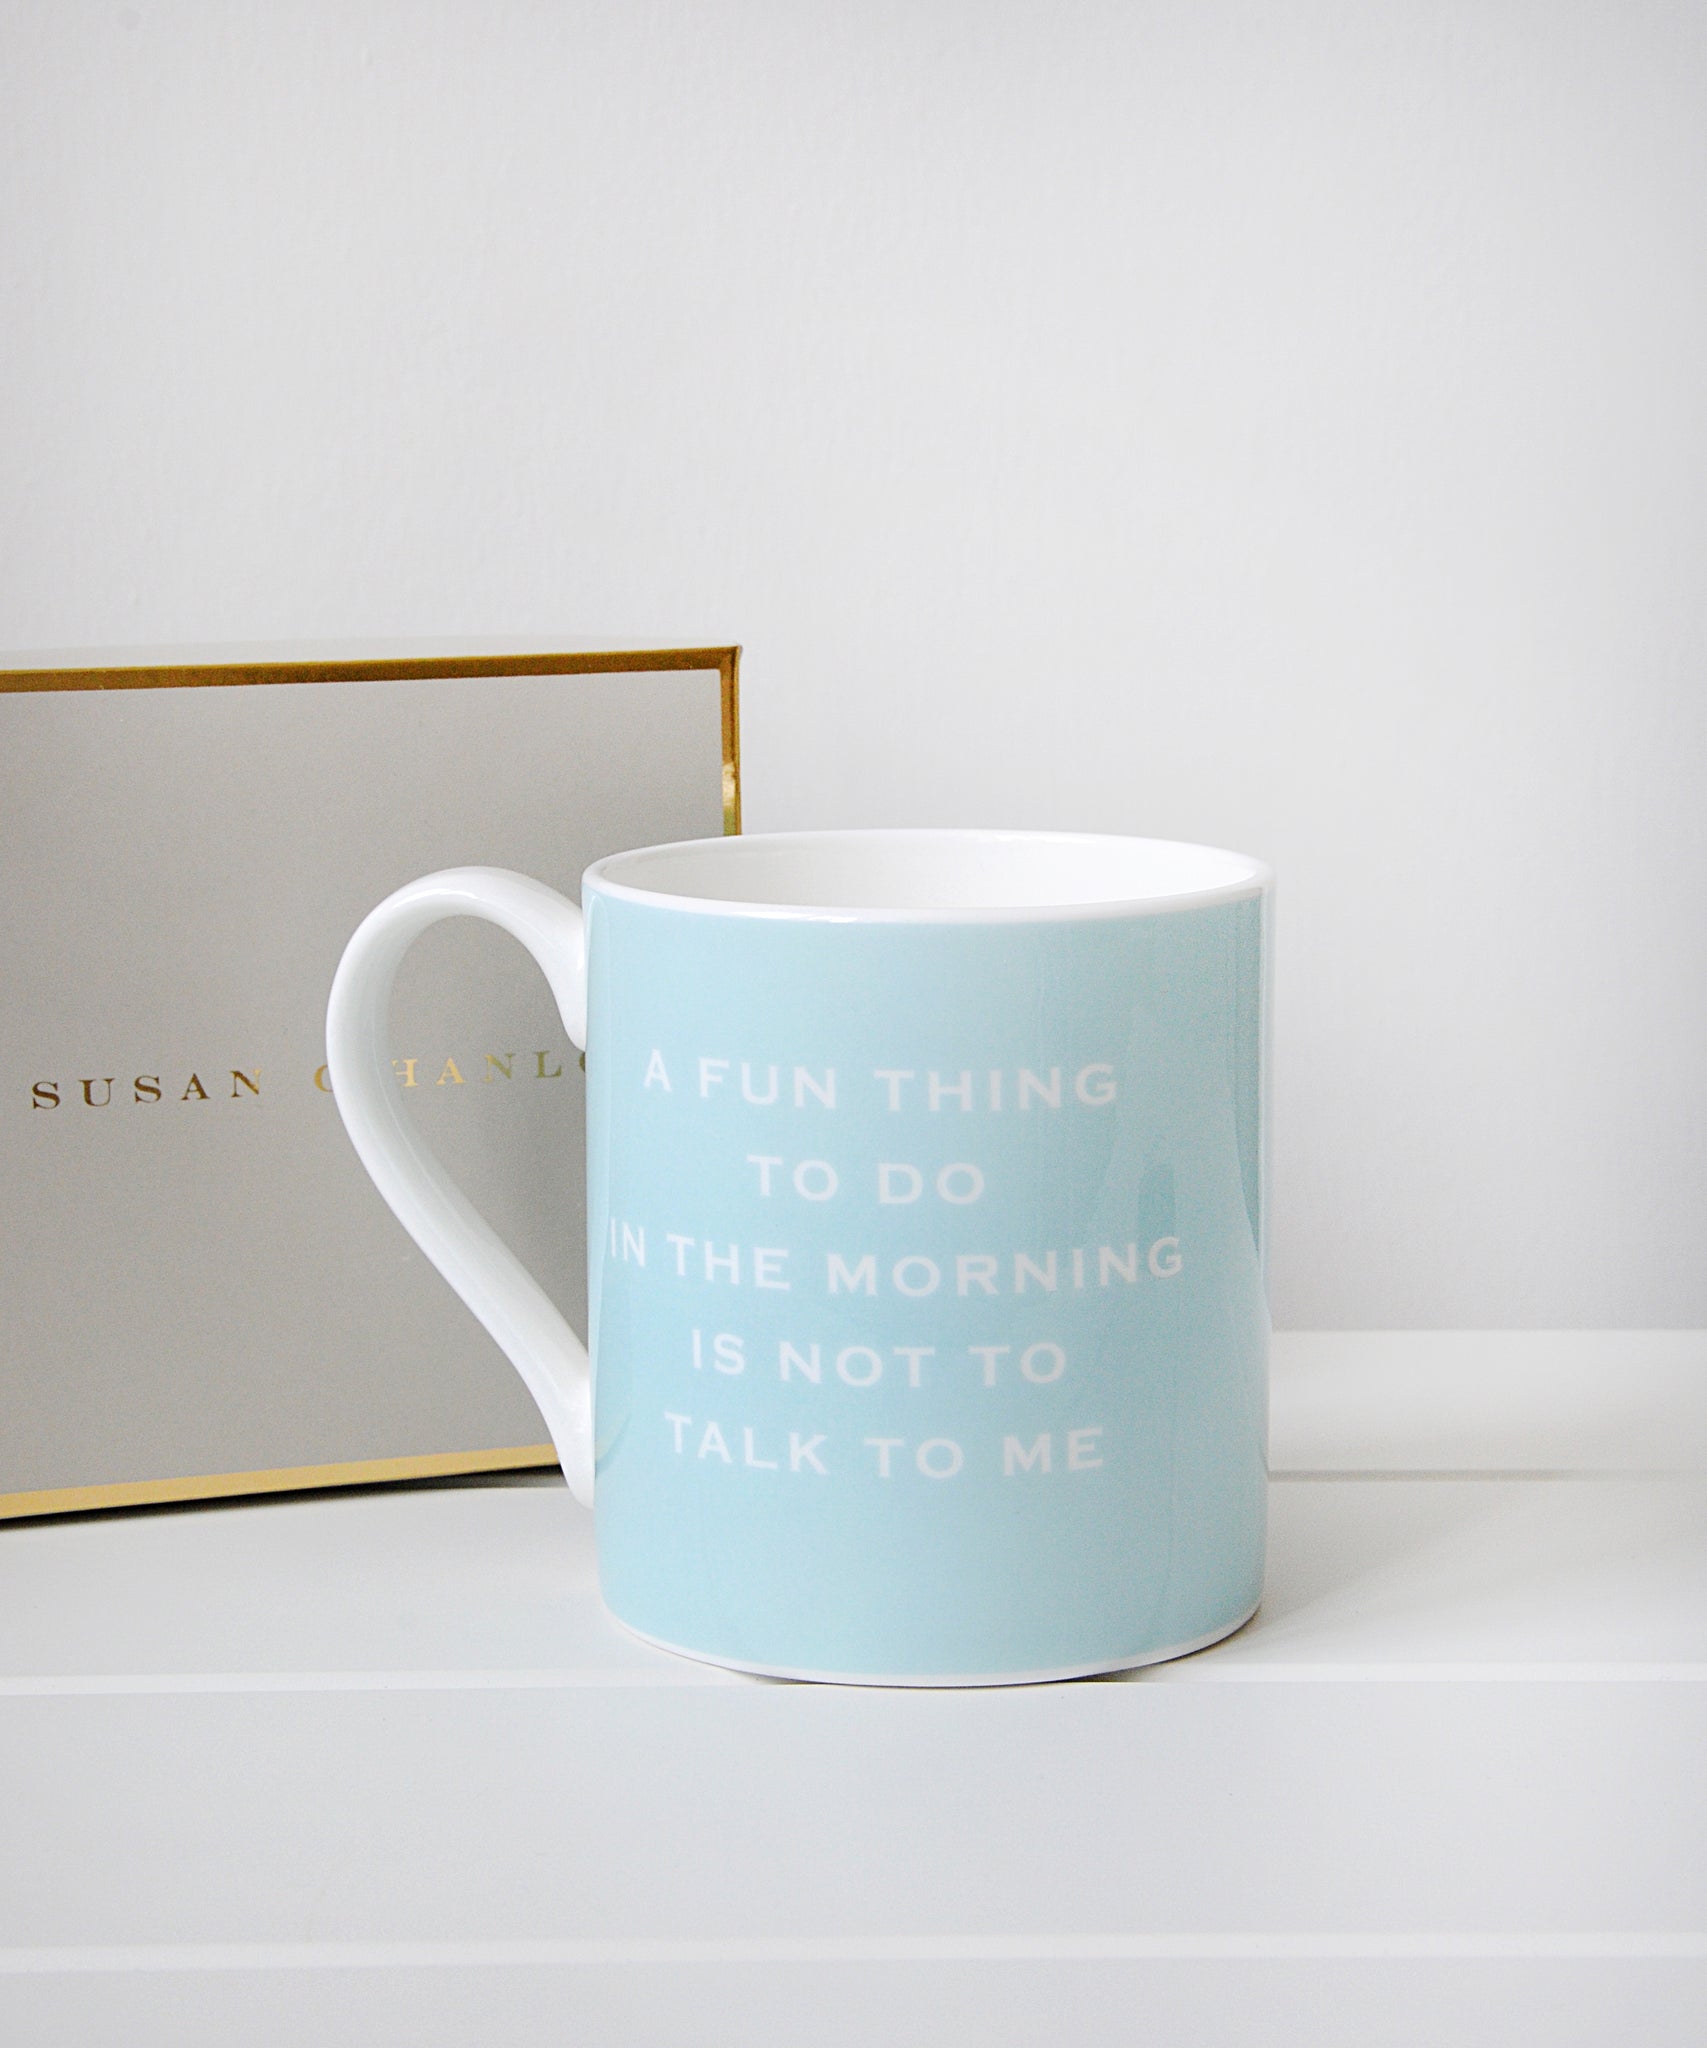 'A fun thing to do in the morning is not to talk to me' - Susan O'Hanlon Mug